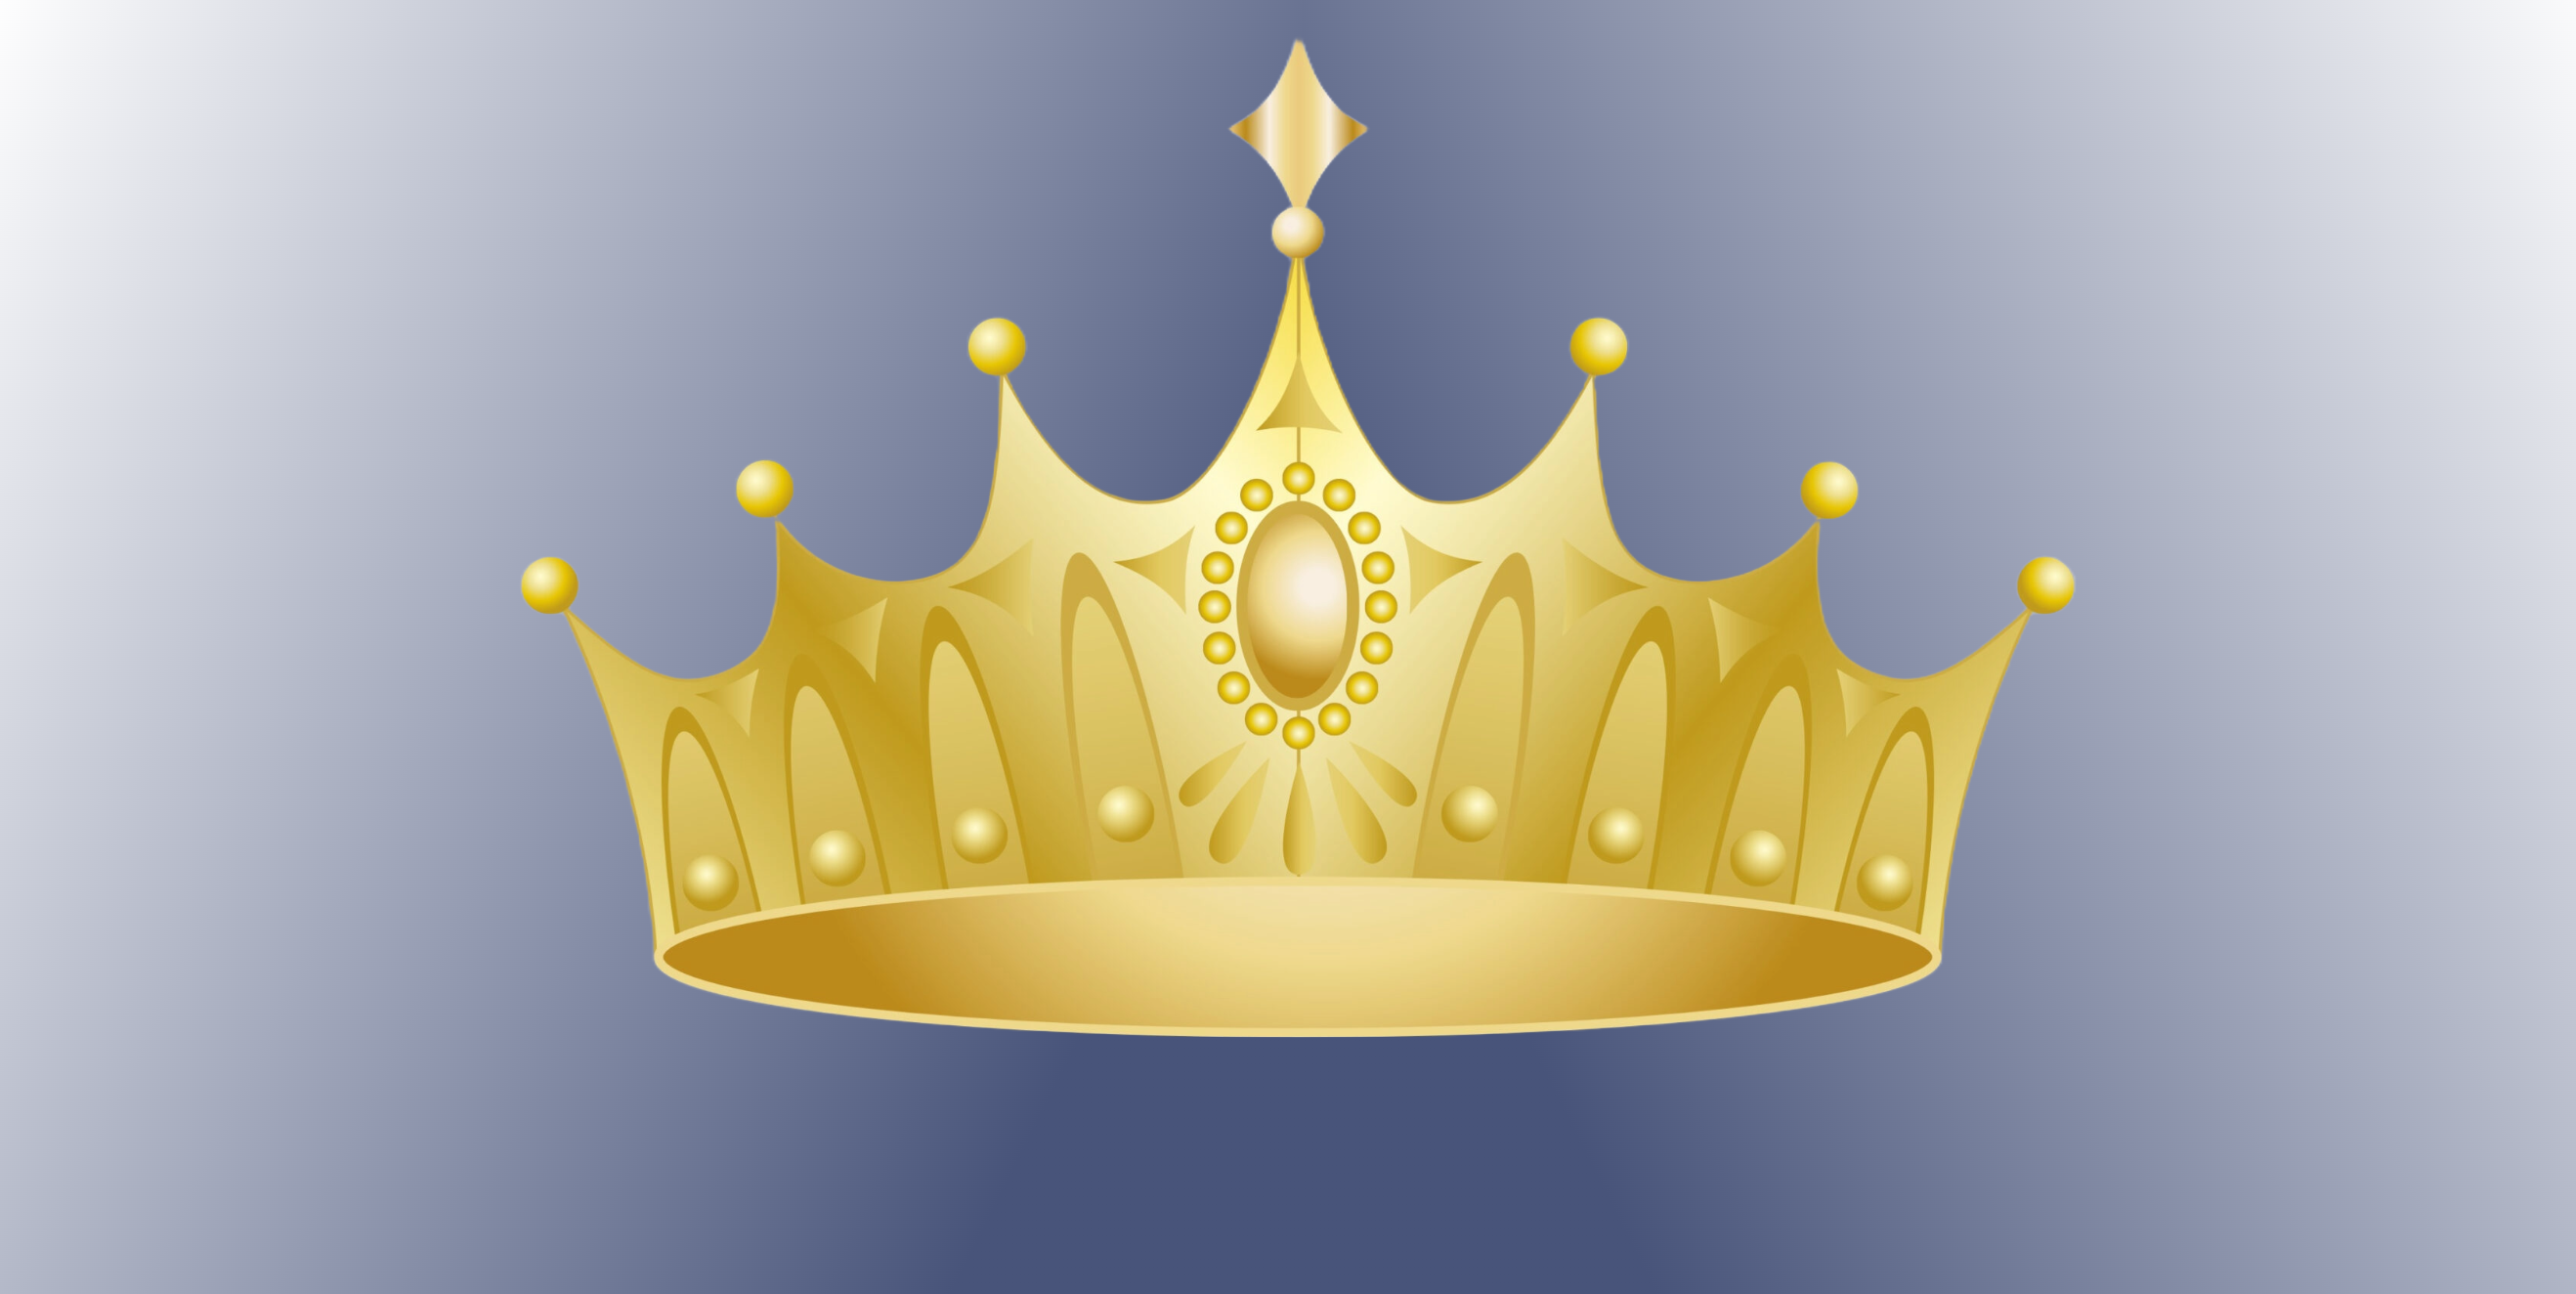 Be silent or speak – this crown represents the story of Purim.